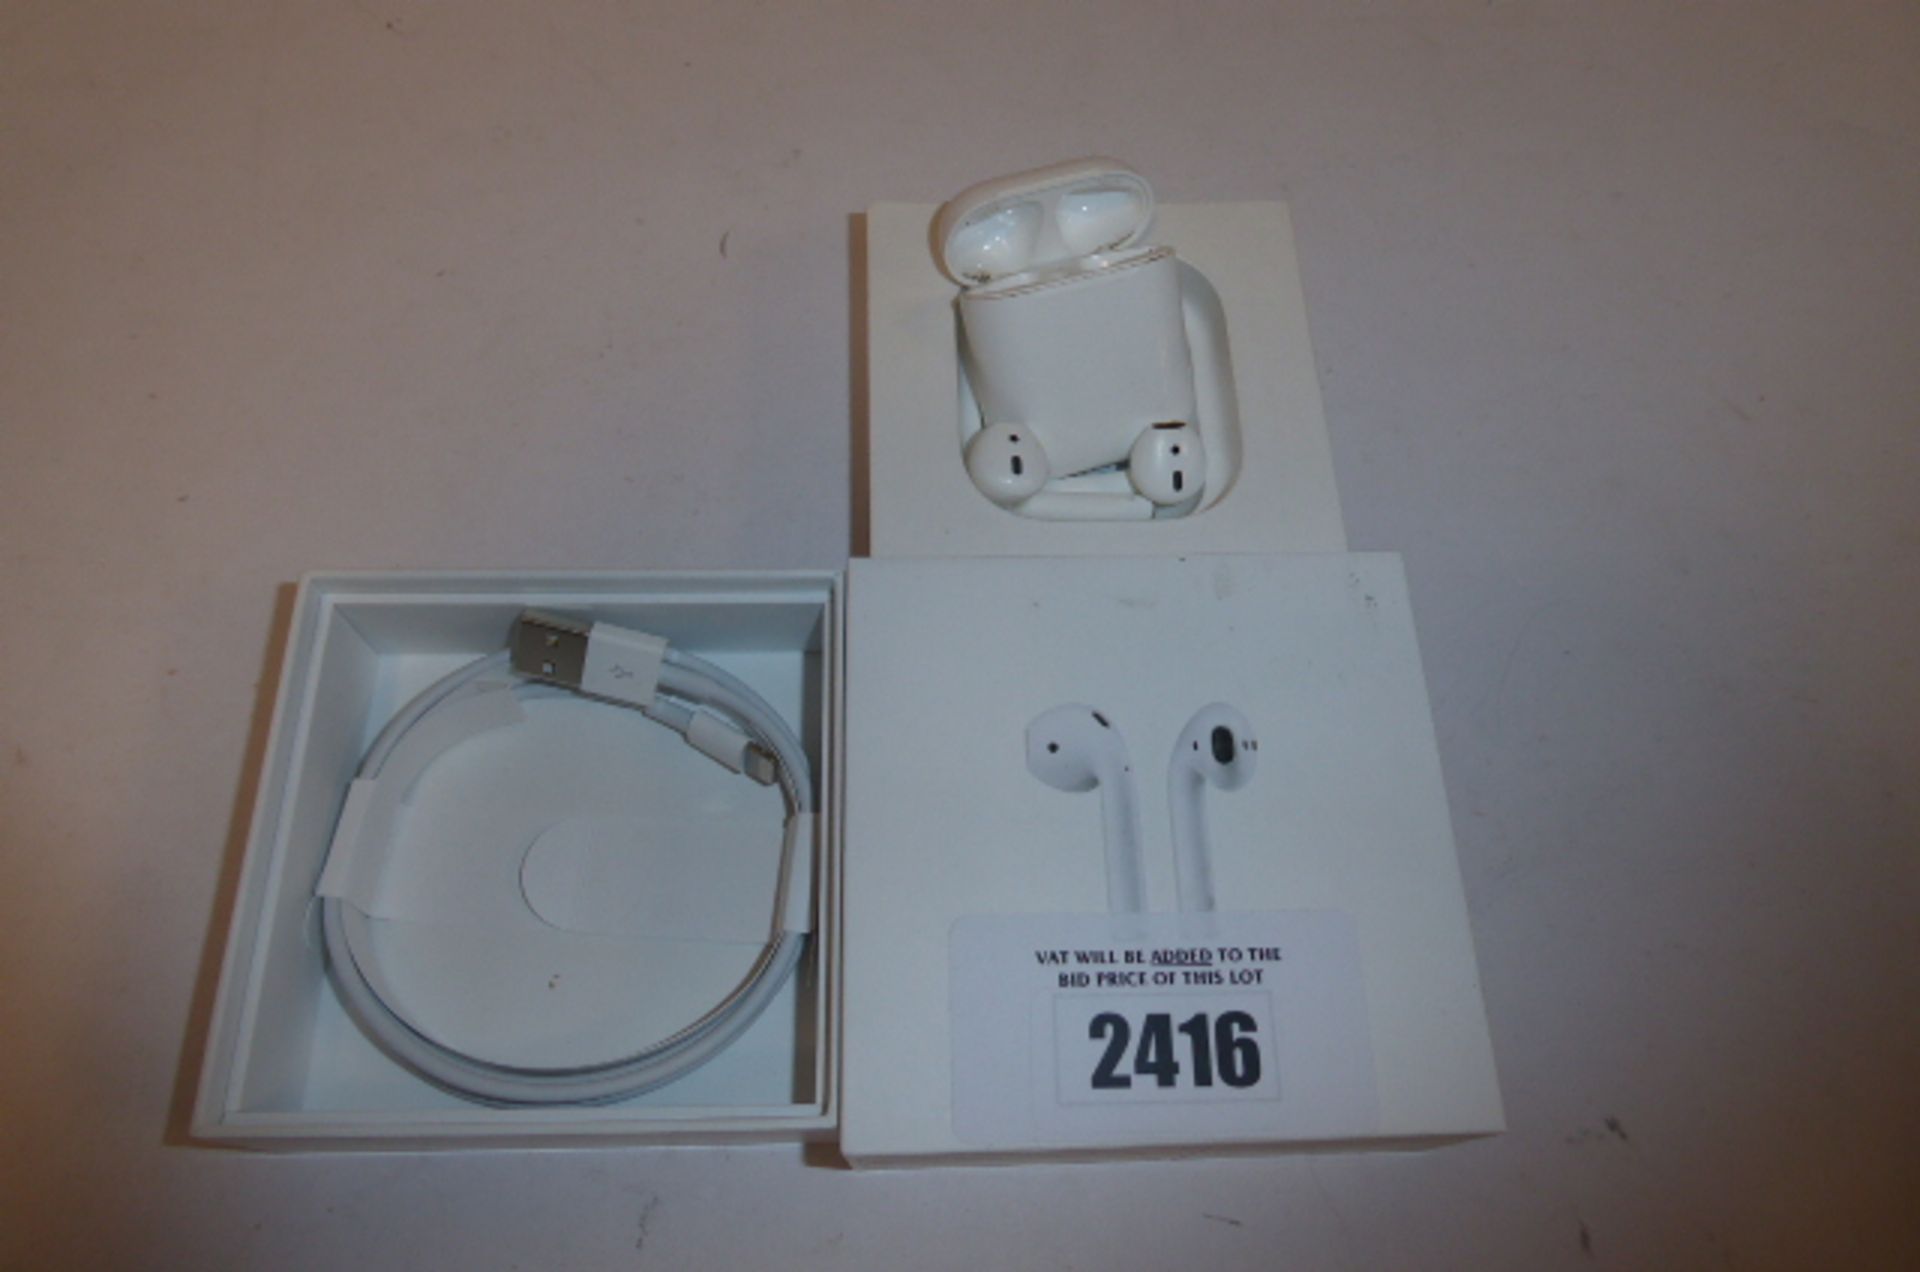 Apple Airpods 1st generation with charging case, cable and box